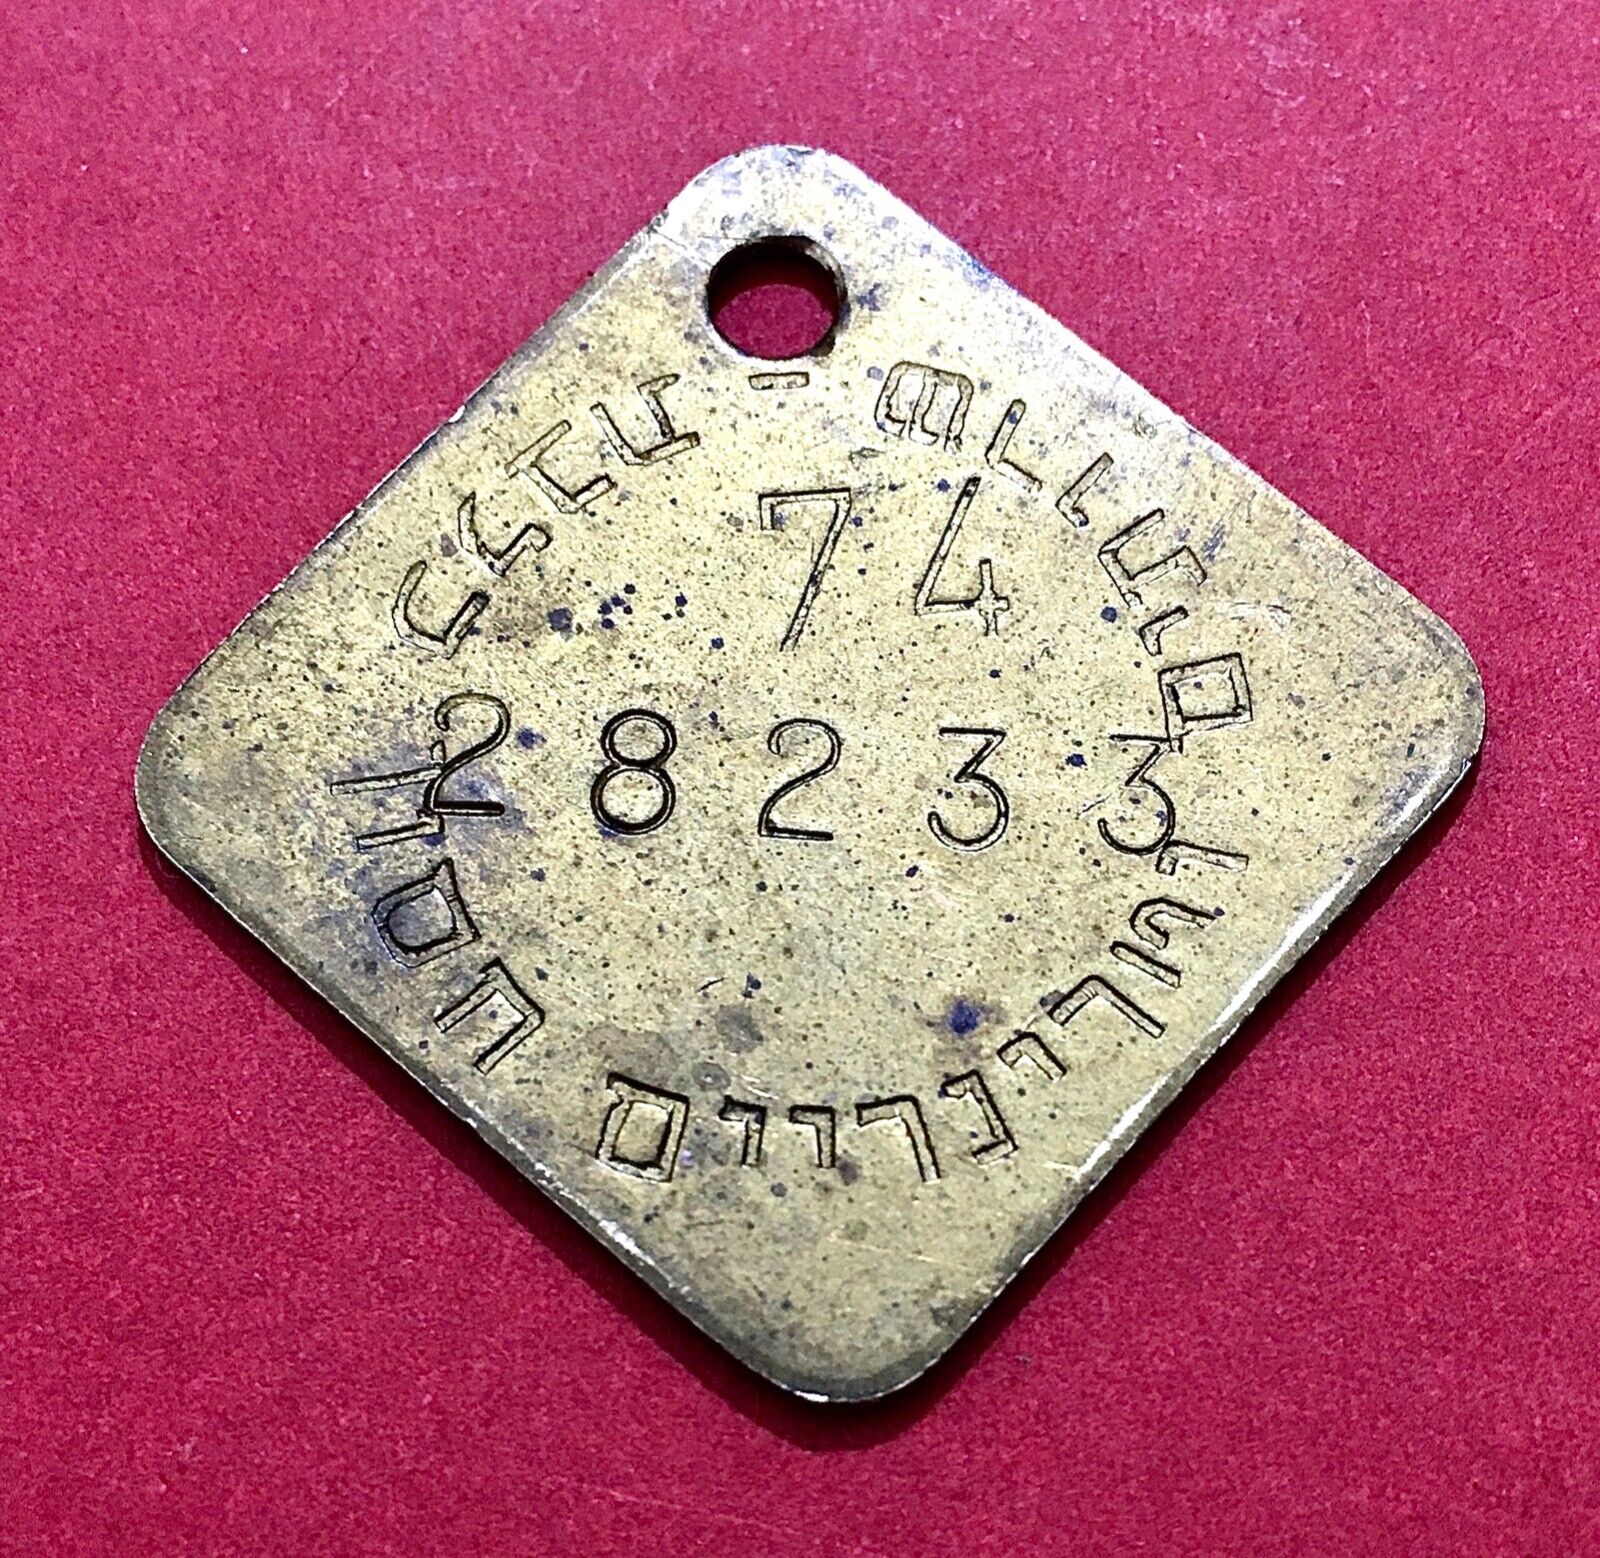 Veterinary service for rabies prevention numbered dog tag 1974 Israel